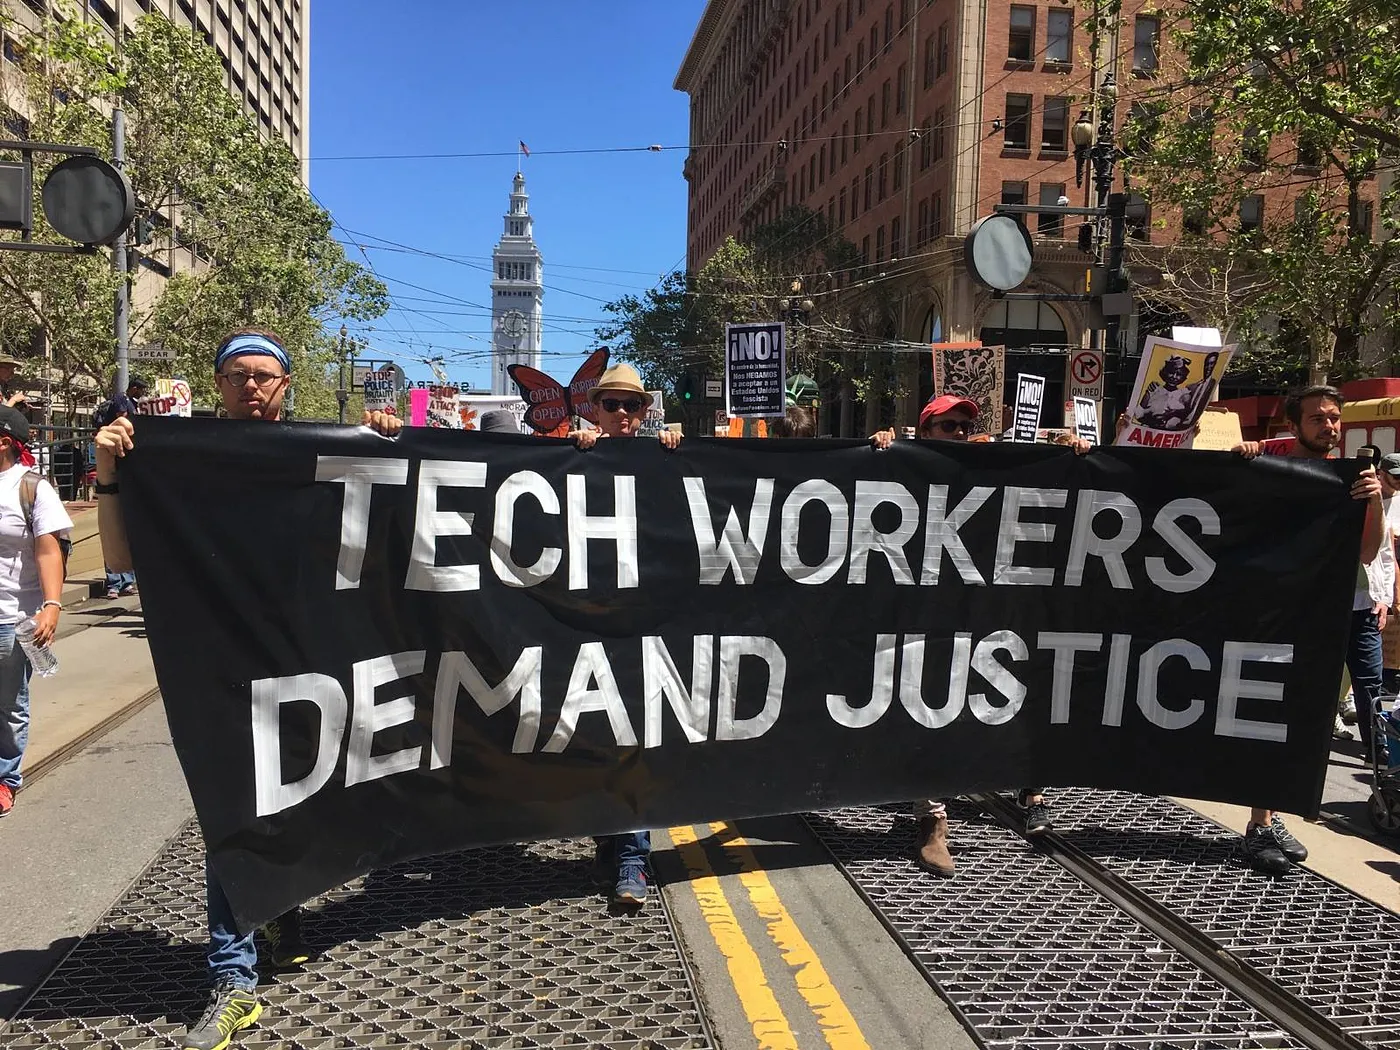 Group of people outside marching while holding a large banner with text that reads "TECH WORKERS DEMAND JUSTICE"